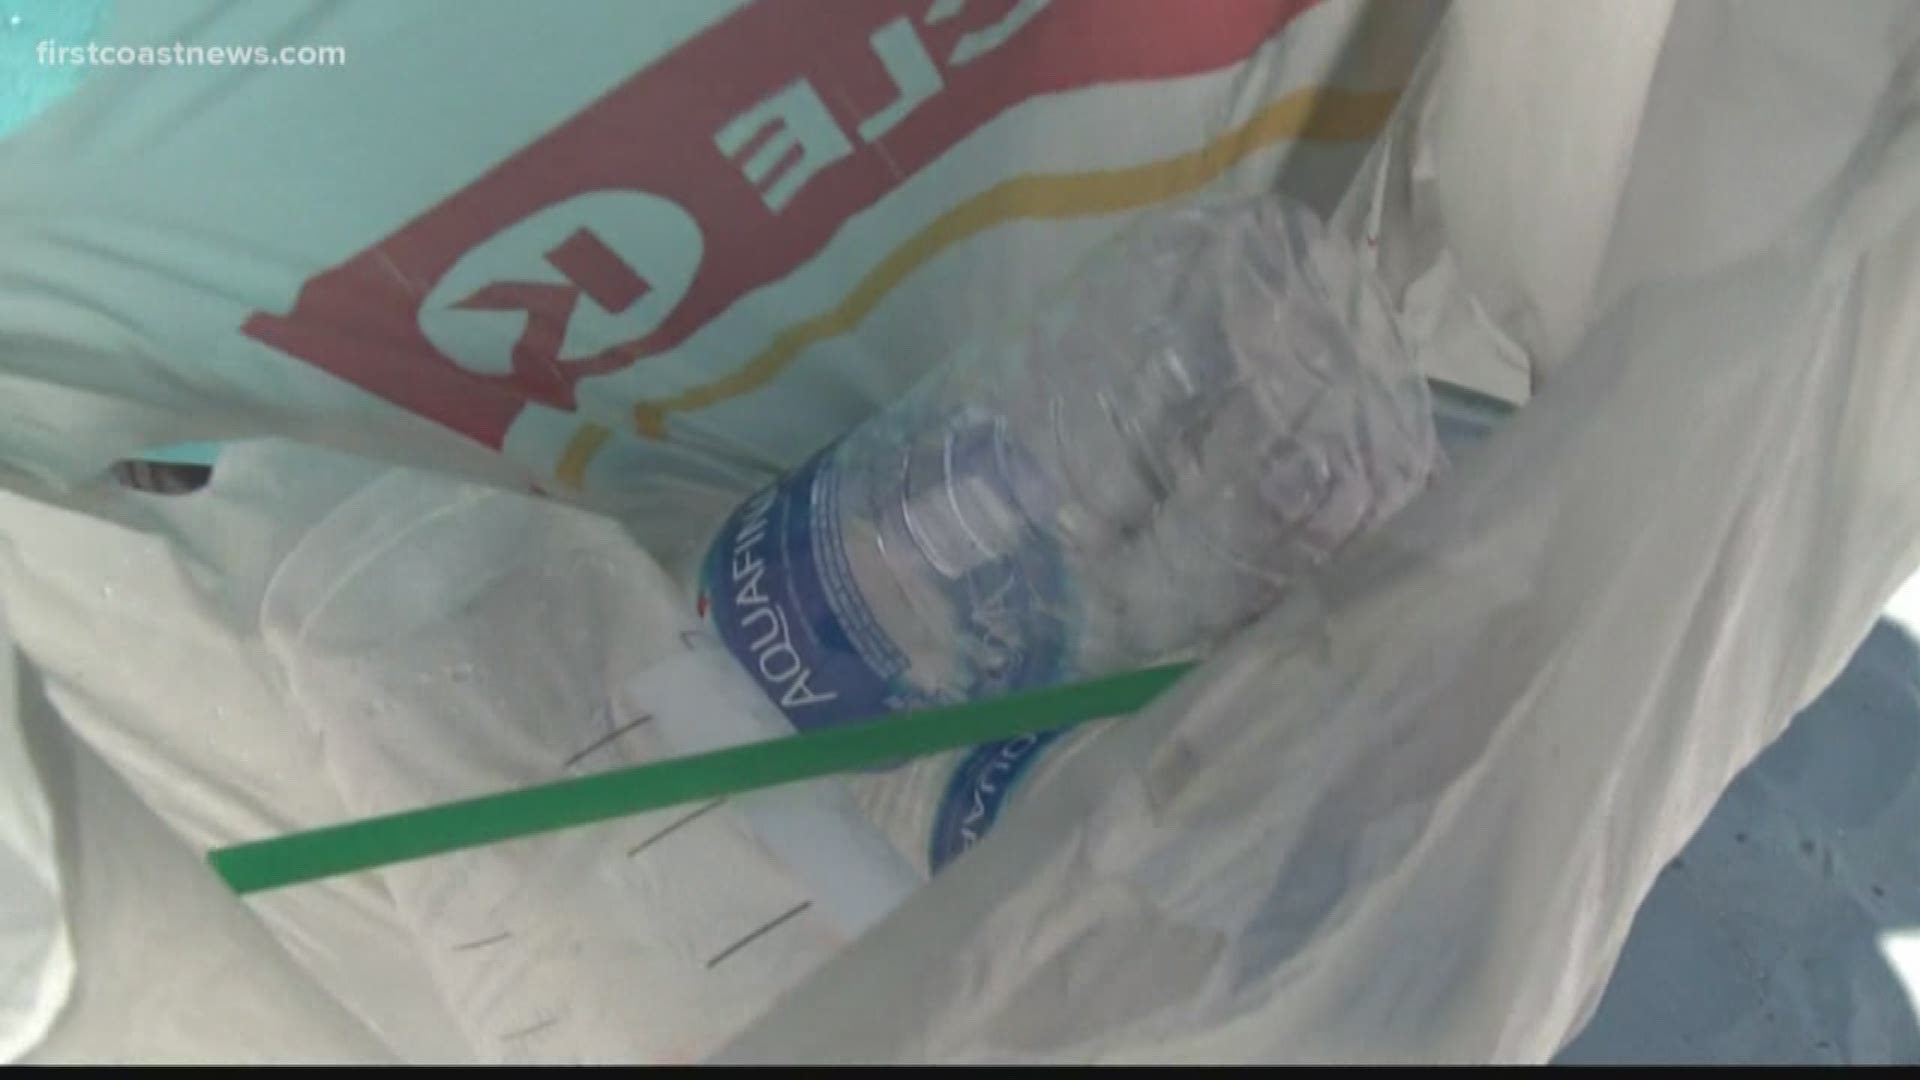 One veteran from the First Coast is working to make bottled water obsolete.